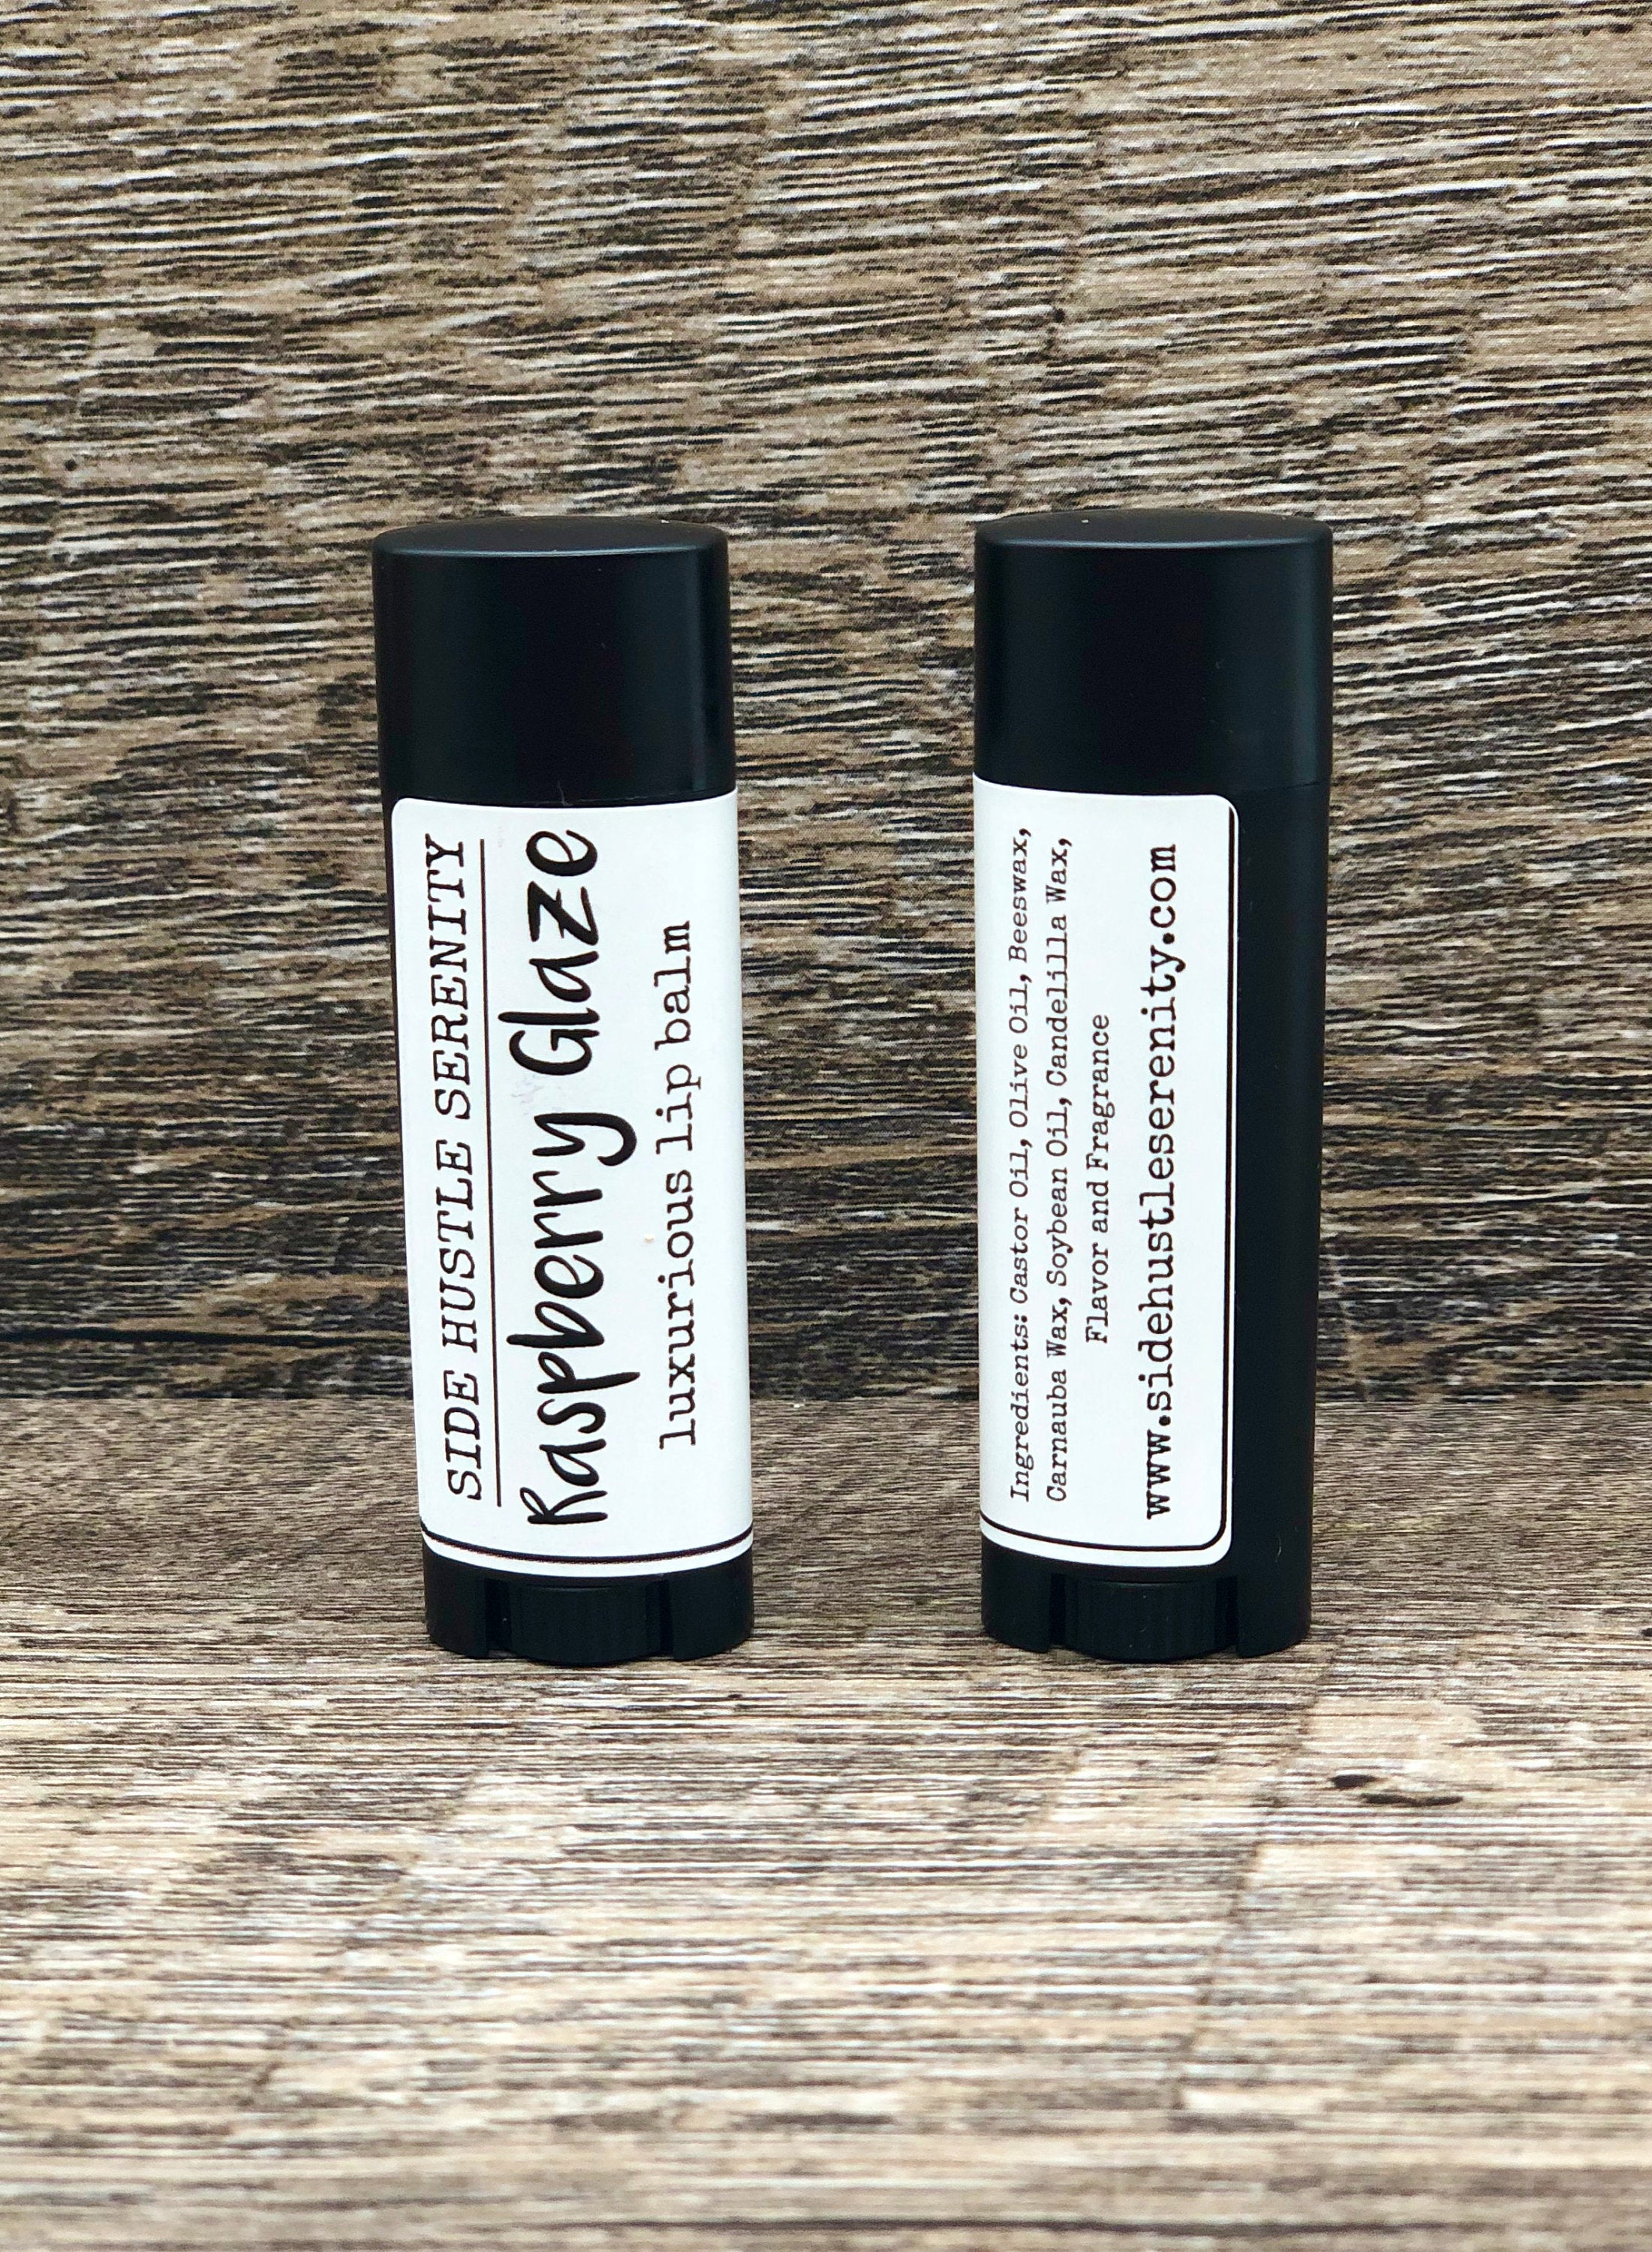 LIP BALM 2 Pack | Pick of Assorted Flavors | Soft Lips | Beeswax Lip Balm | Best Ever Lip Balm | Lip Balm Tube | Smooth | Pocket Sized Gift